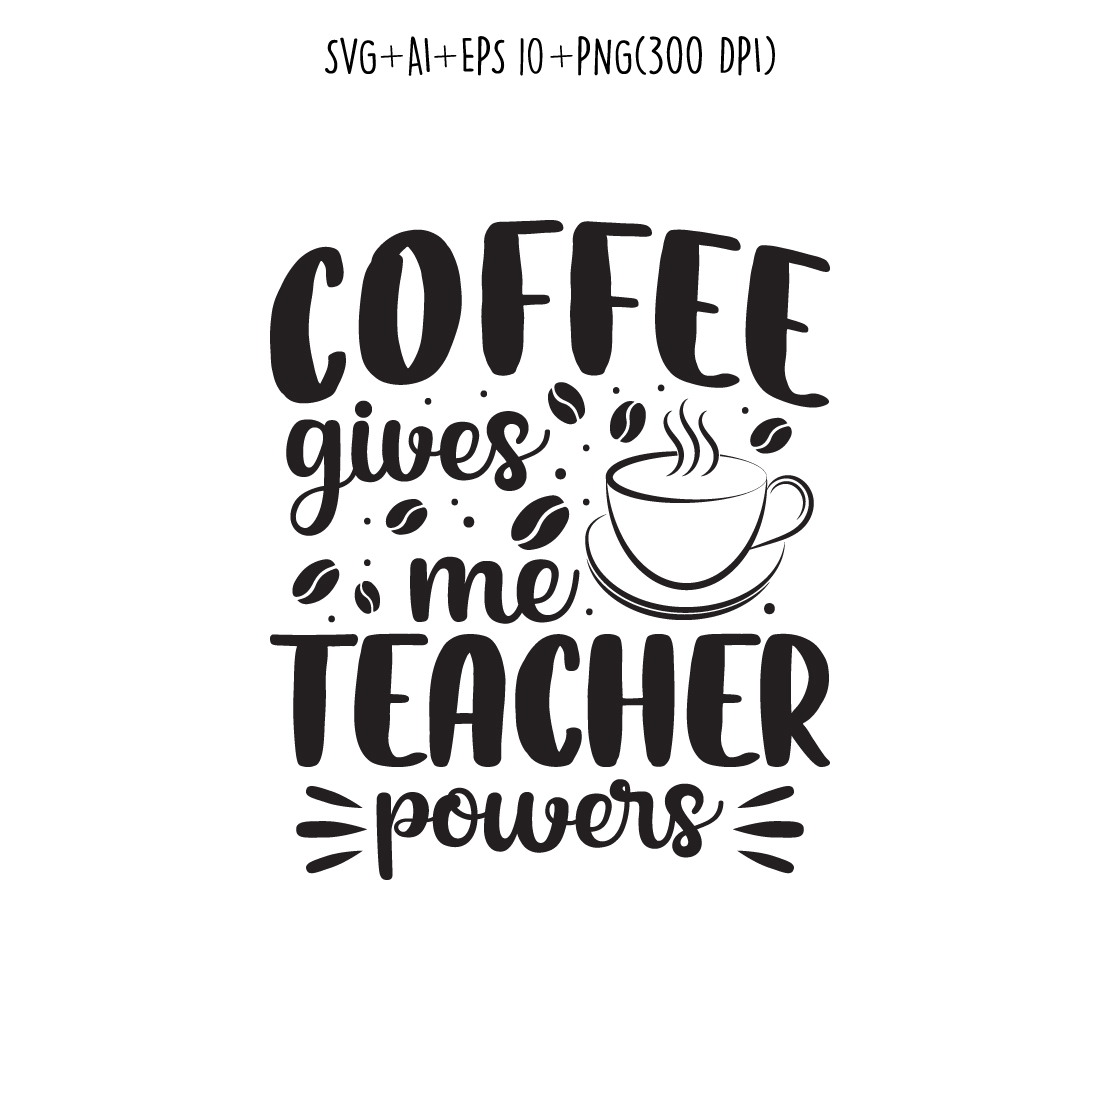 coffee gives me teacher powers coffee typography design for t-shirts, print, templates, logos, mug preview image.